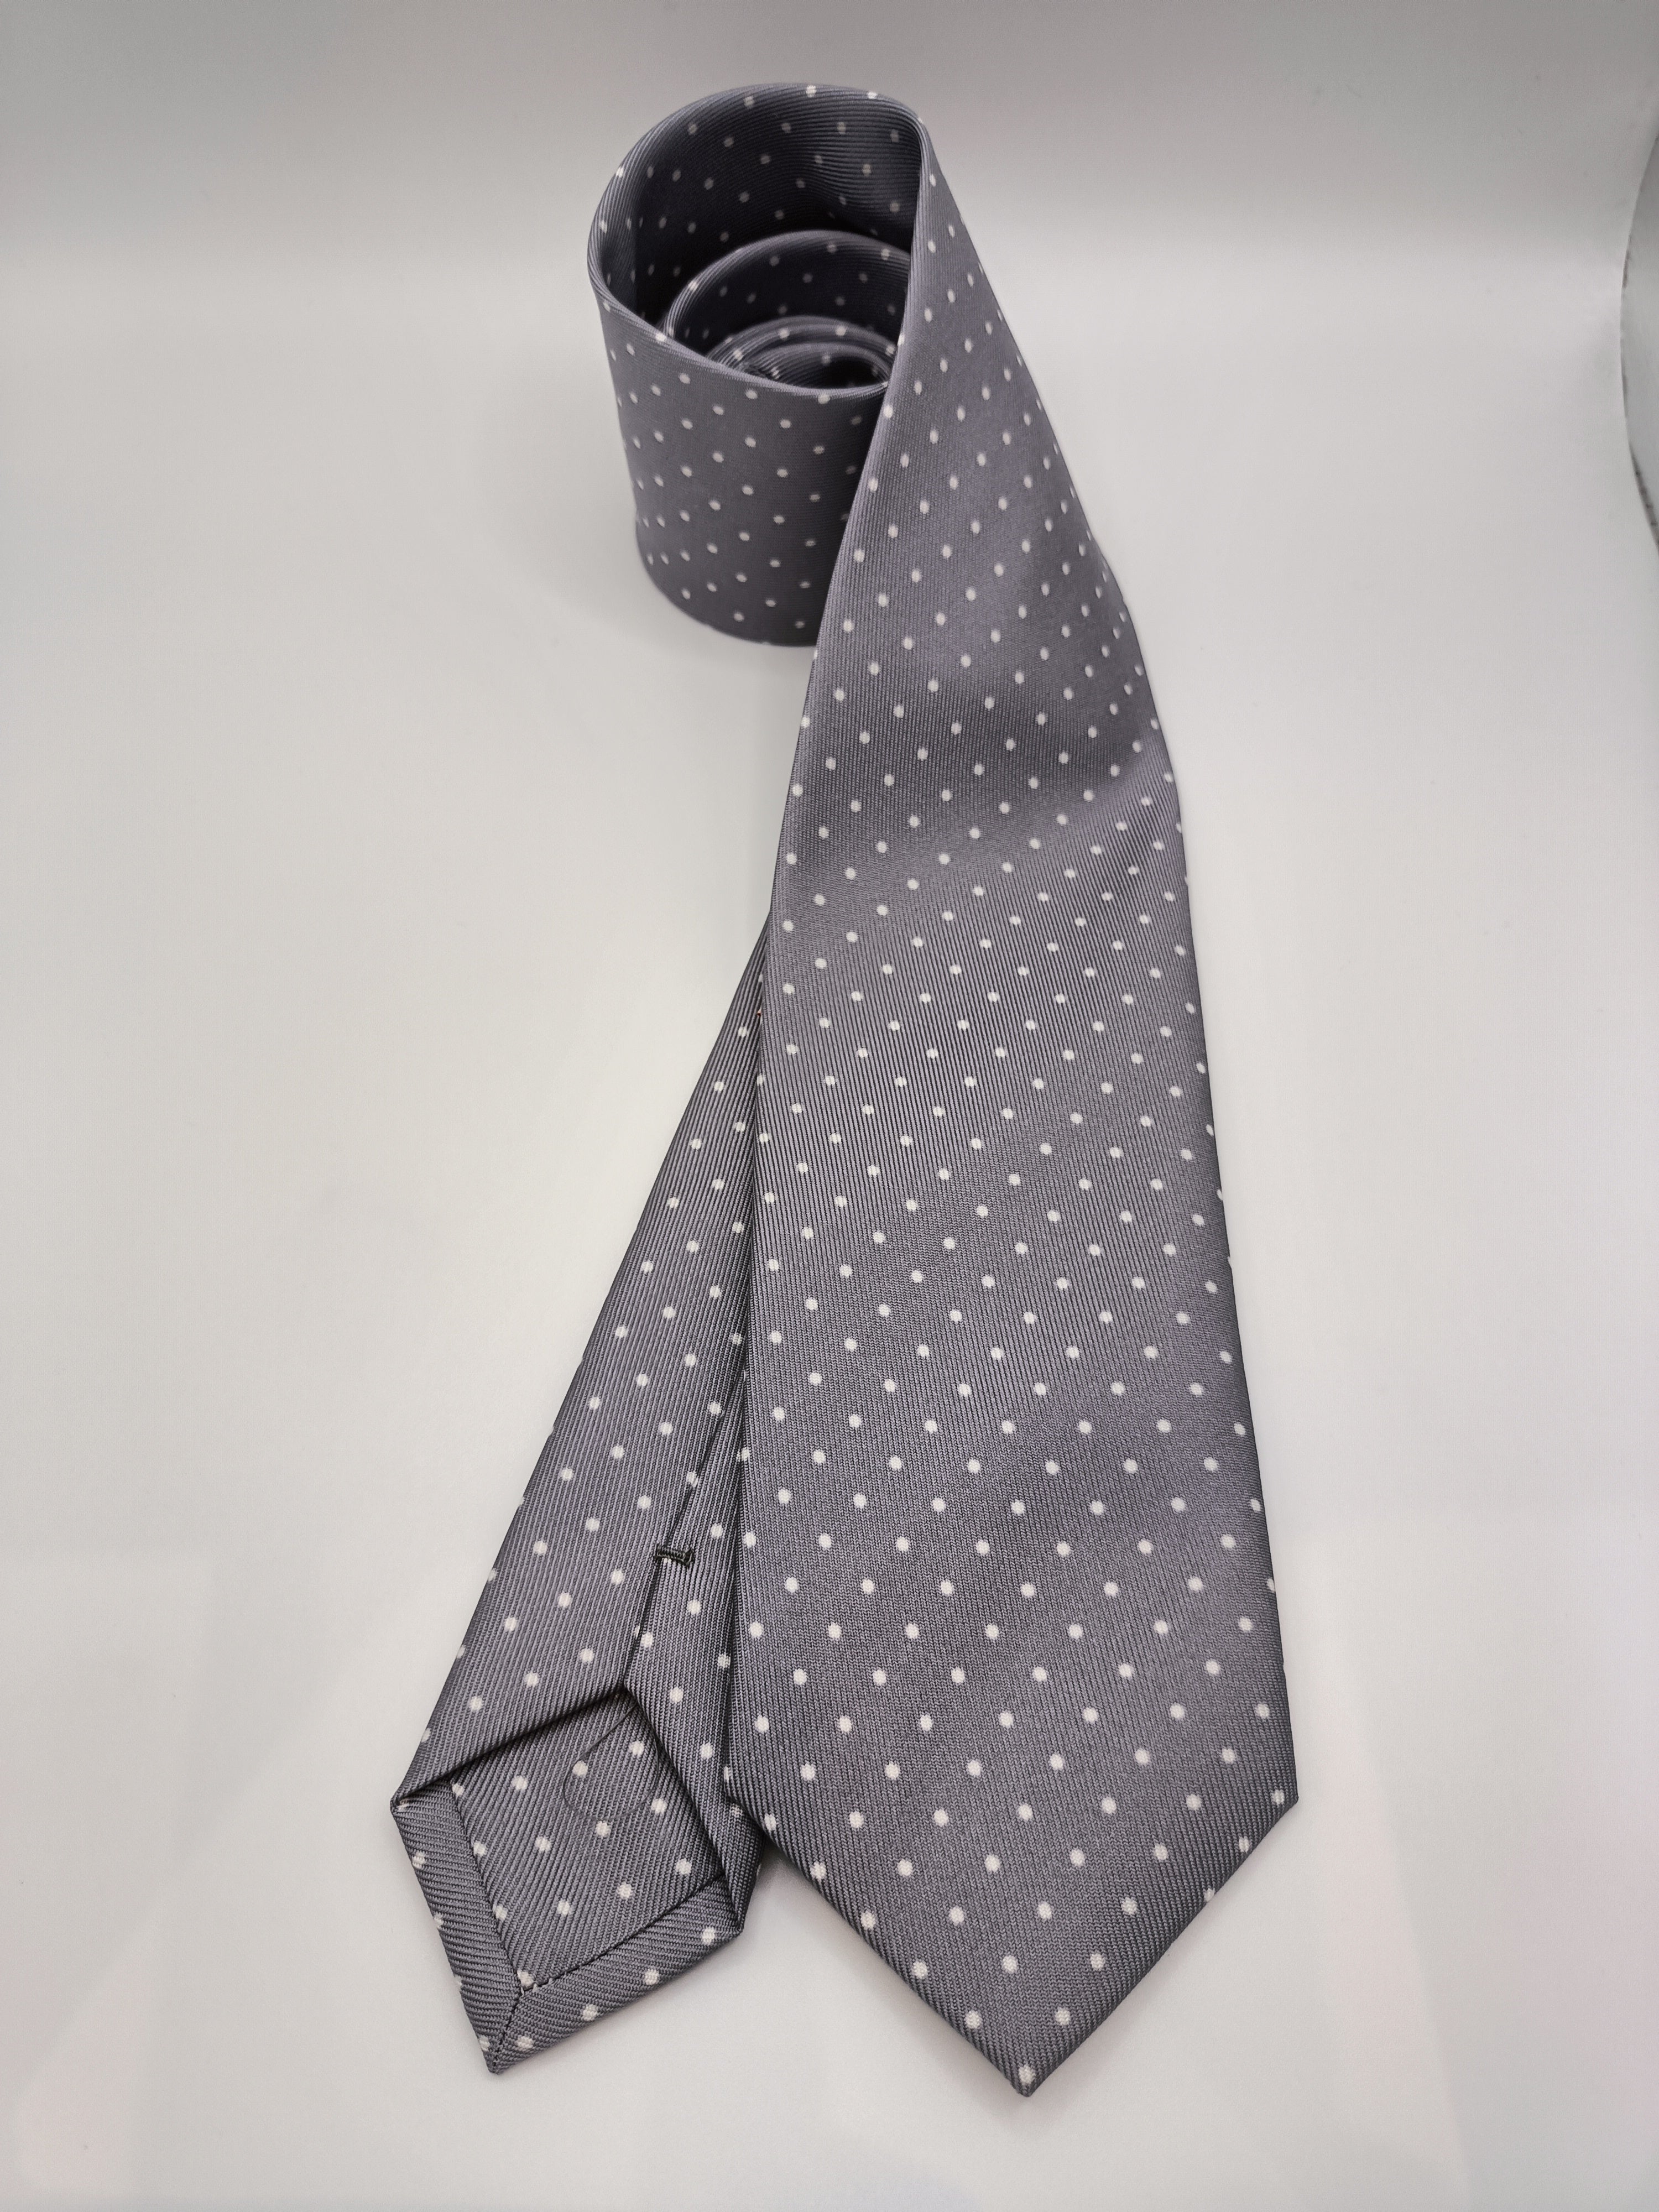 Metal Grey and White Polka Dots Tie